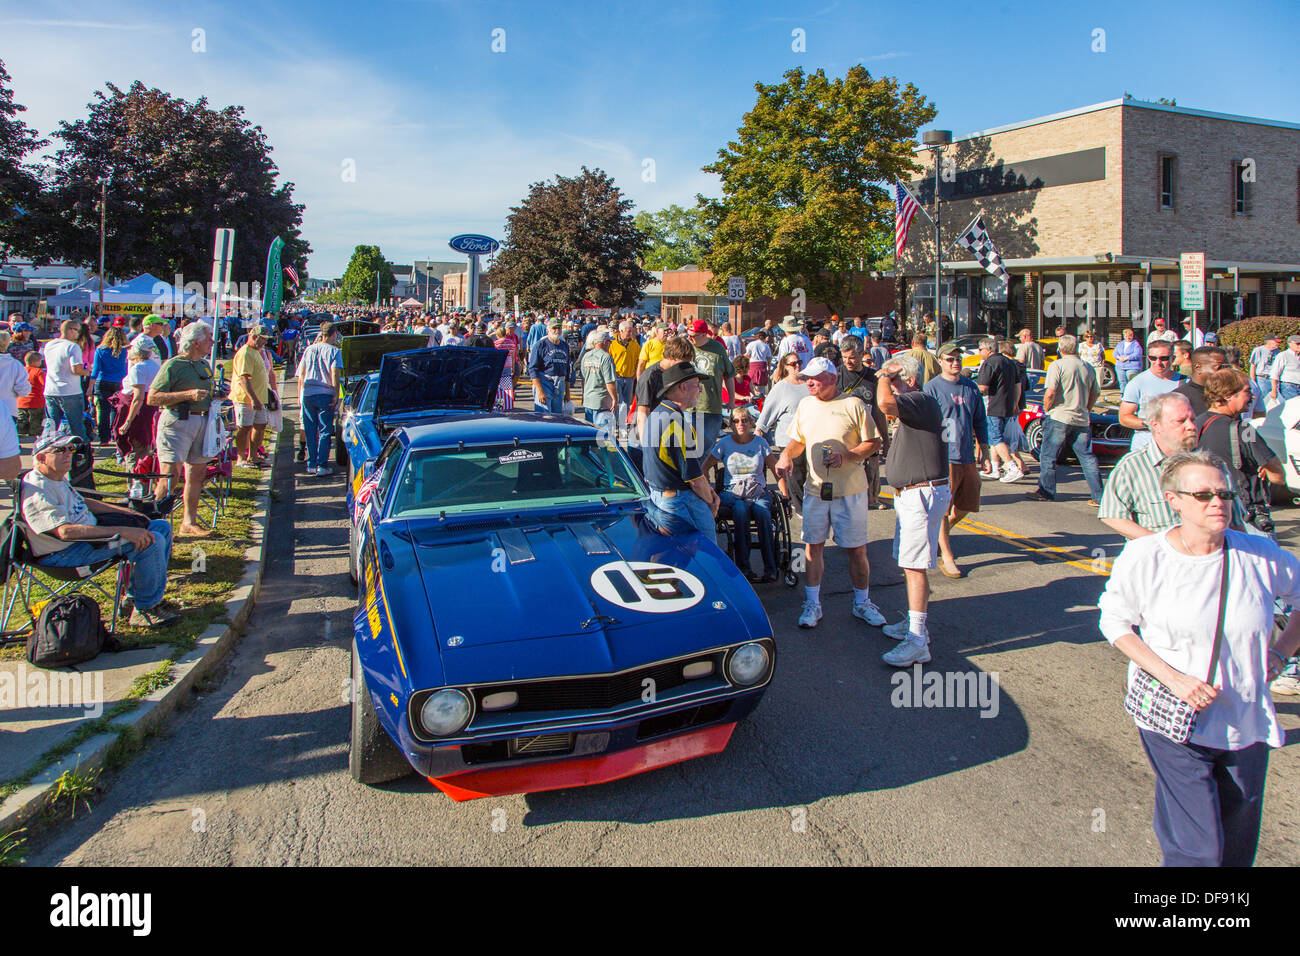 Vintage race cars parked in downtown Watkins Glen during the annual Vintage Race weekend Festival with spectators viewing cars Stock Photo